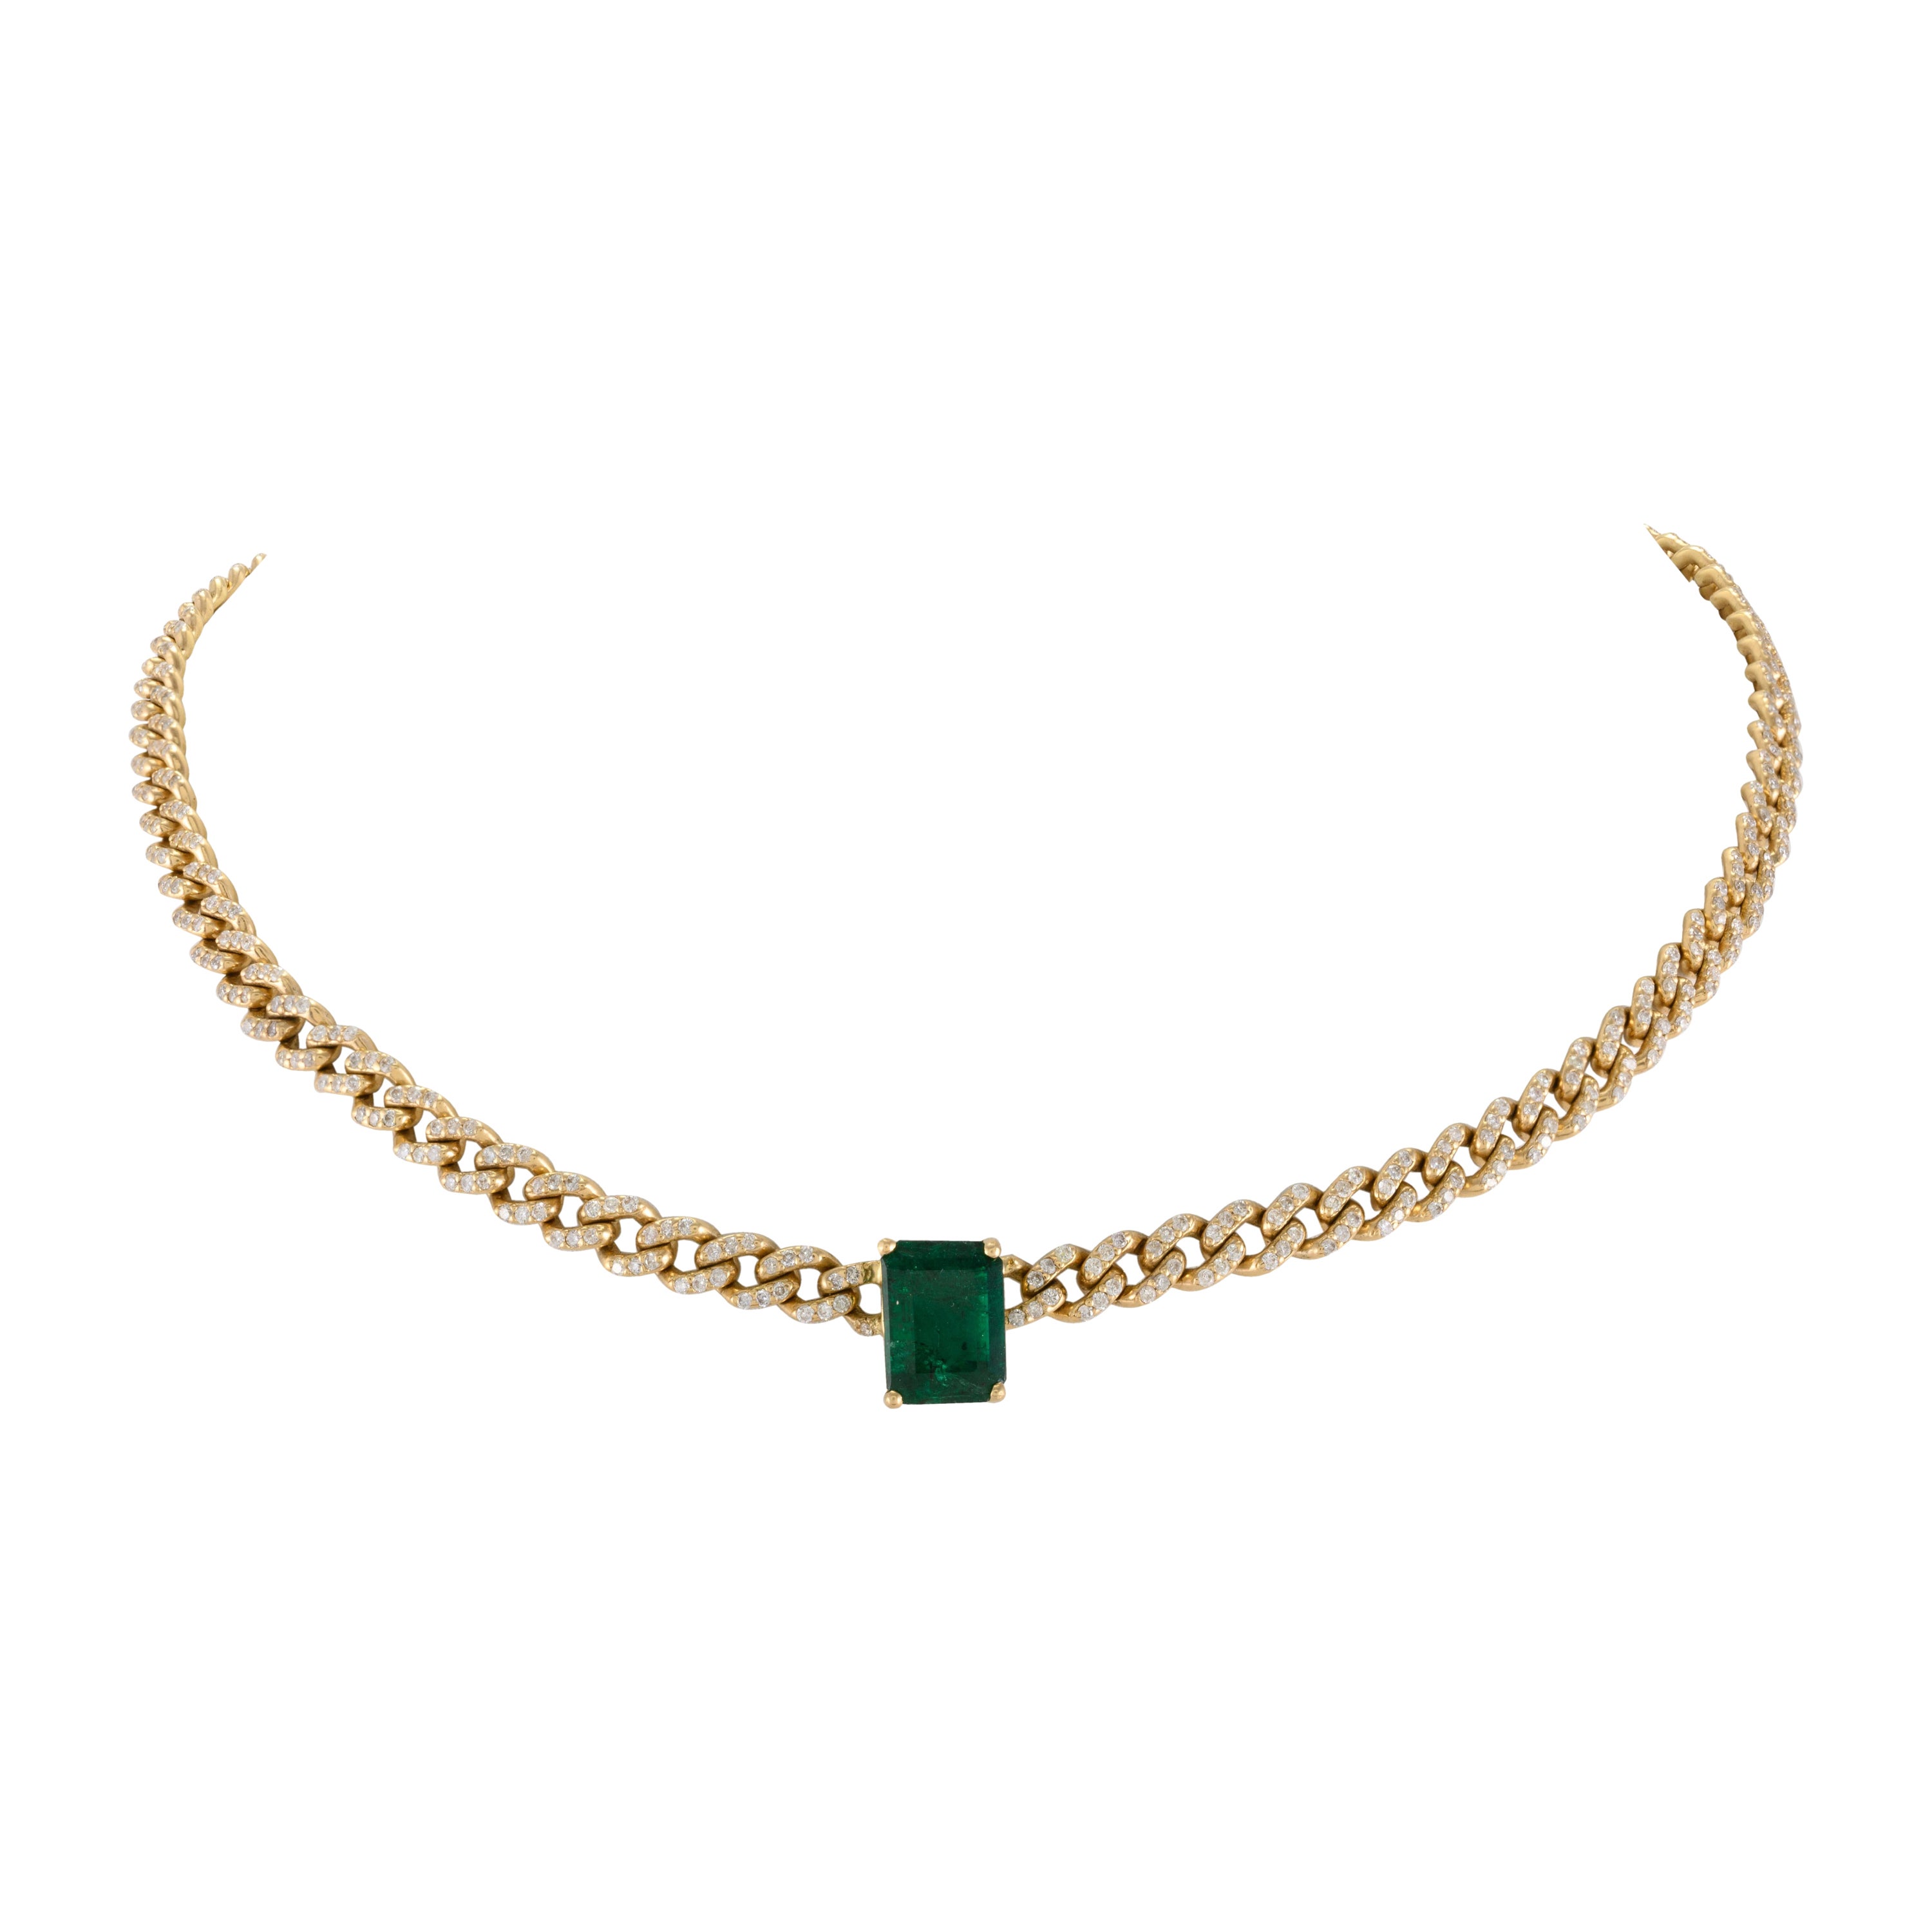 Statement Emerald Diamond Choker Necklace in 18k Solid Yellow Gold for Women